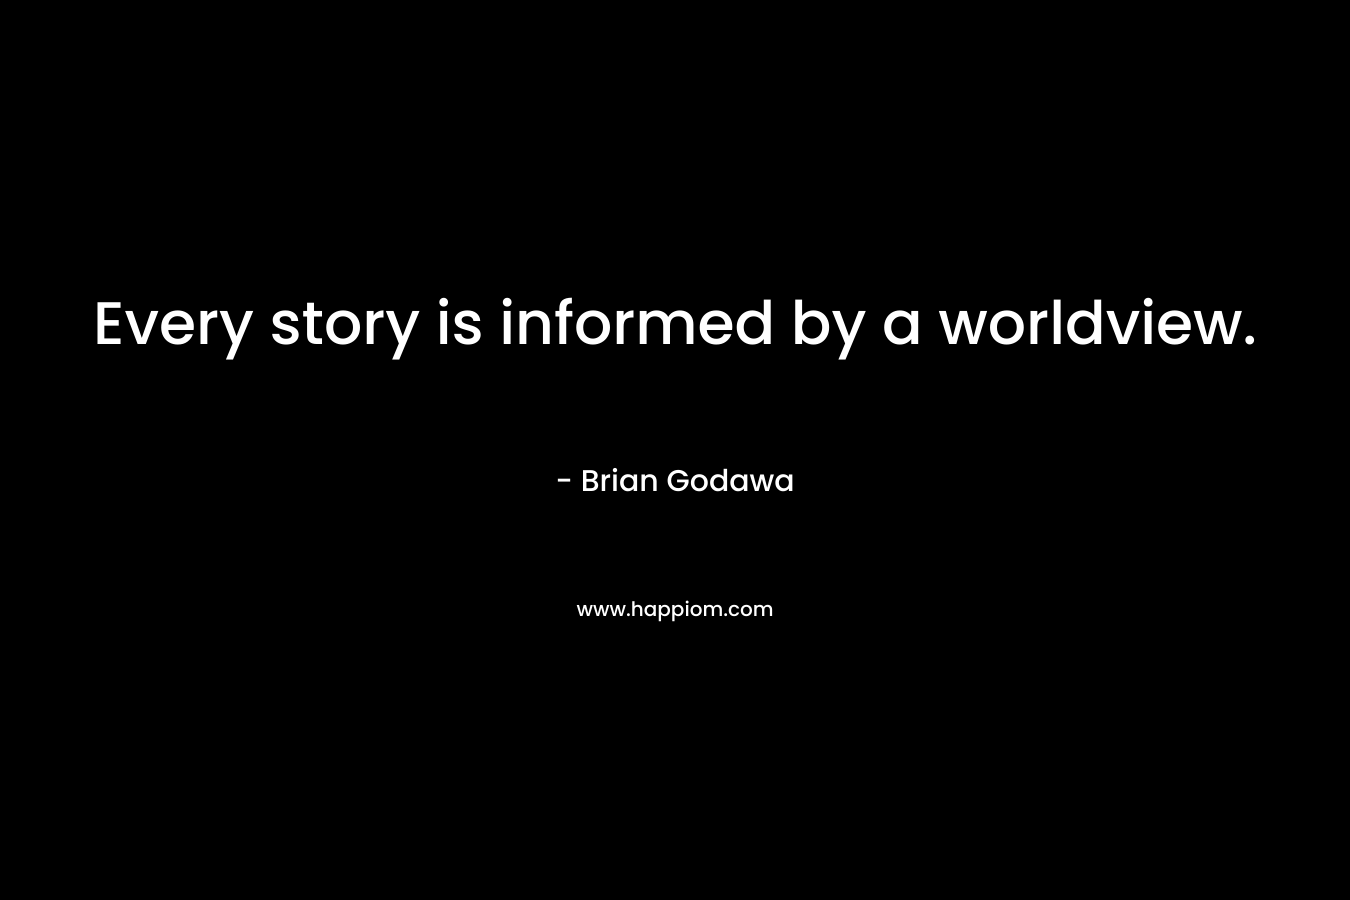 Every story is informed by a worldview. – Brian Godawa